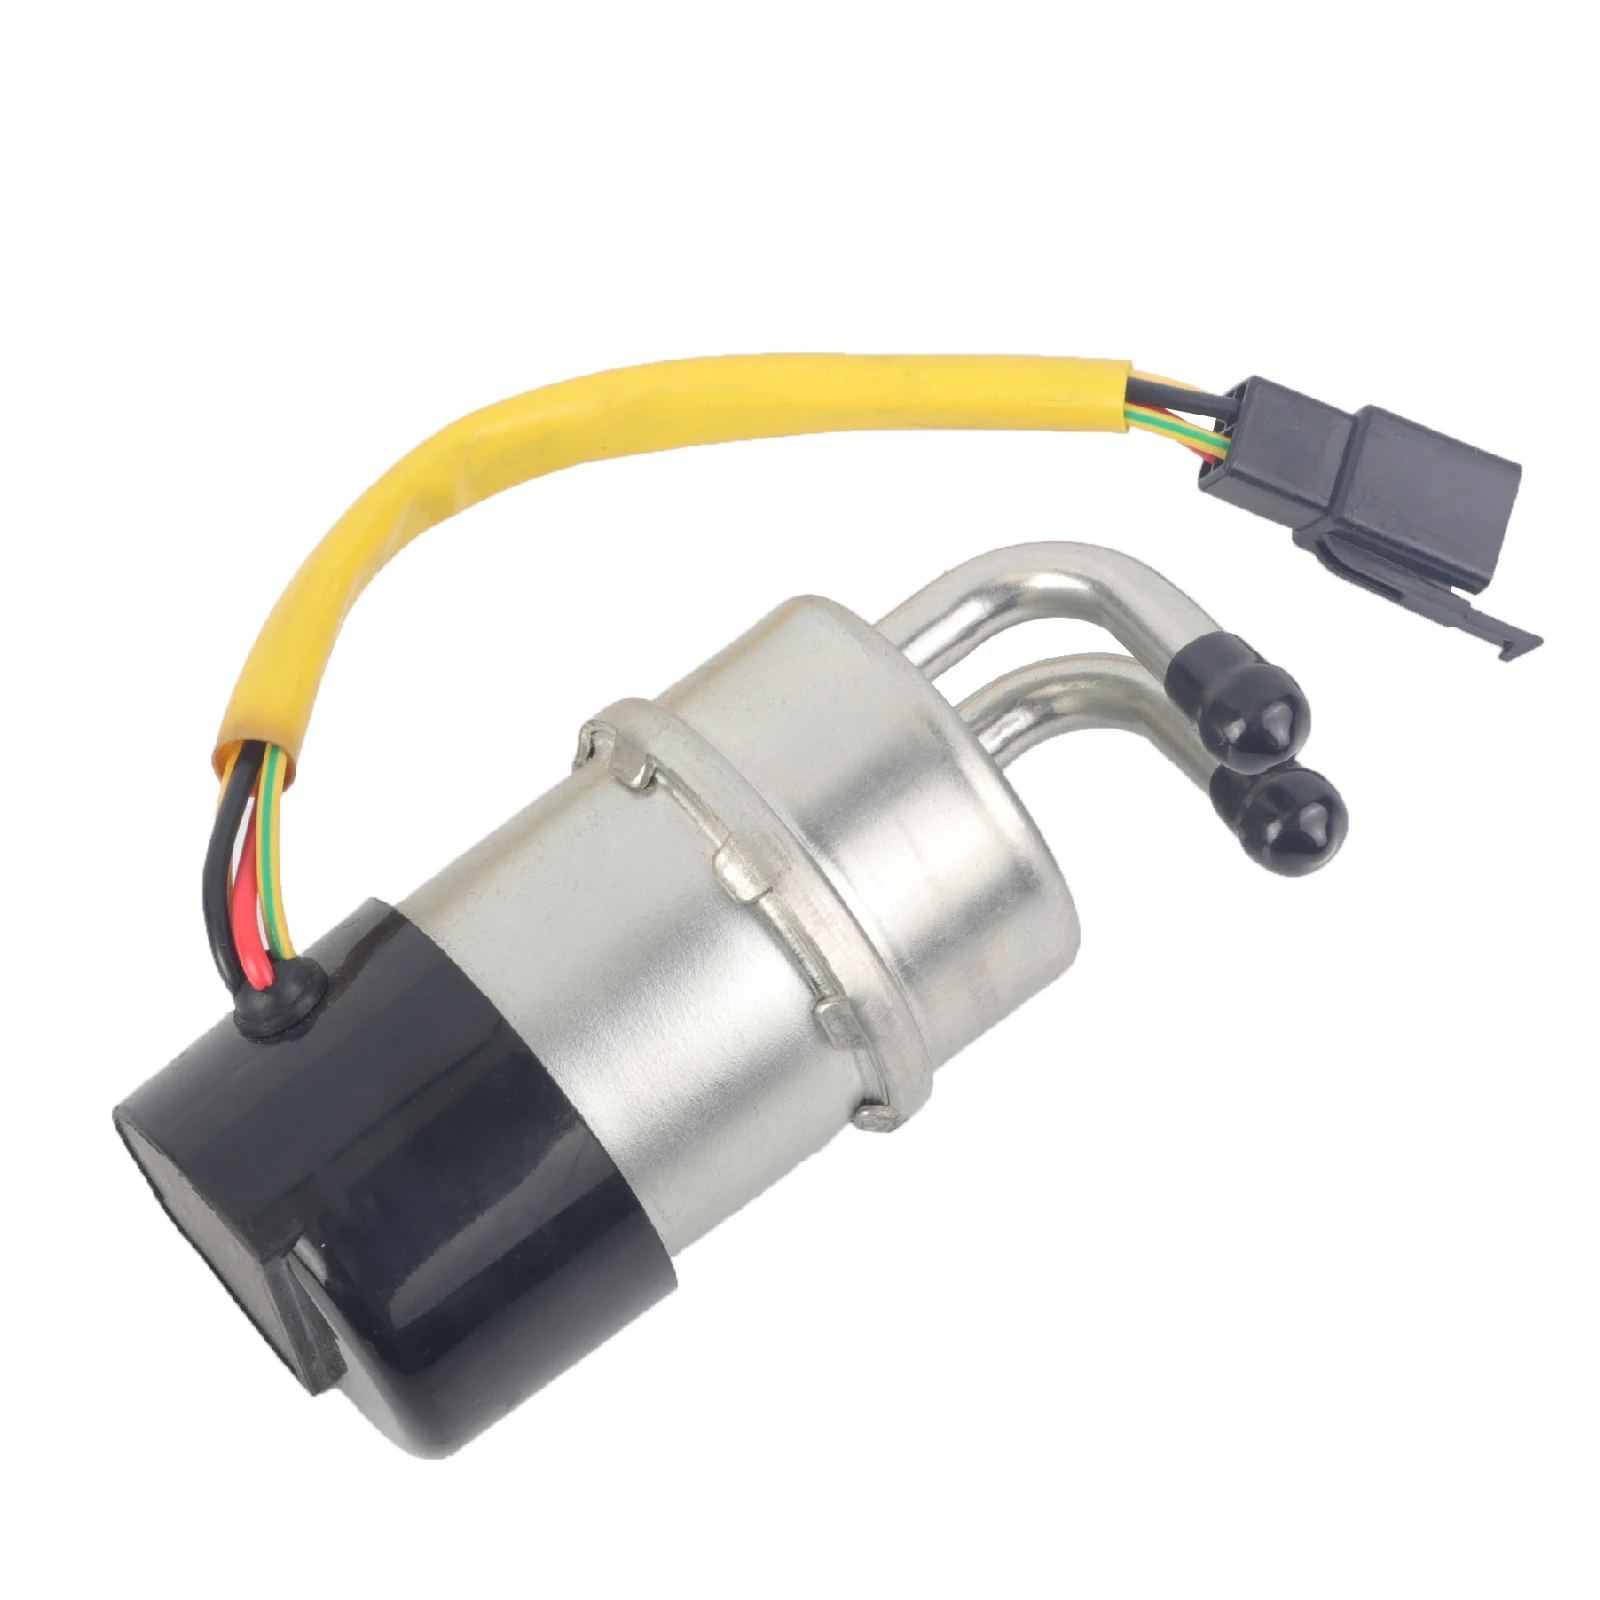 Fuel Pump Assembly Motorcycle Compatible with Suzuki VS700 VS800 Intruder 1986-2009 Parts Accessories